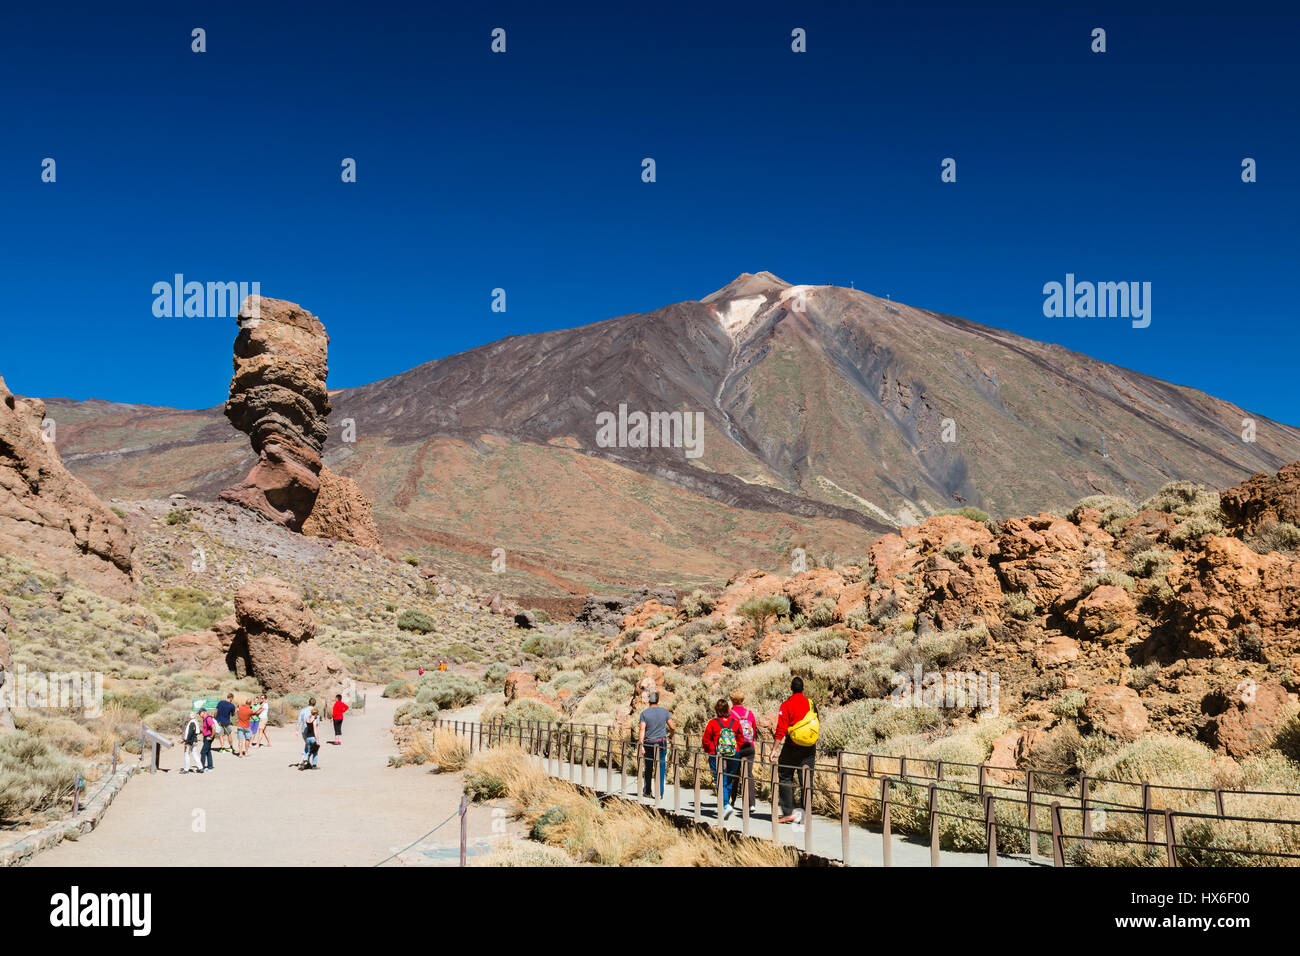 TENERIFE - OCTOBER 10: Tourists walking towards Roque Cinchado in Tenerife, Spain, with the Pico del Teide in the background on October 10, 2014 Stock Photo